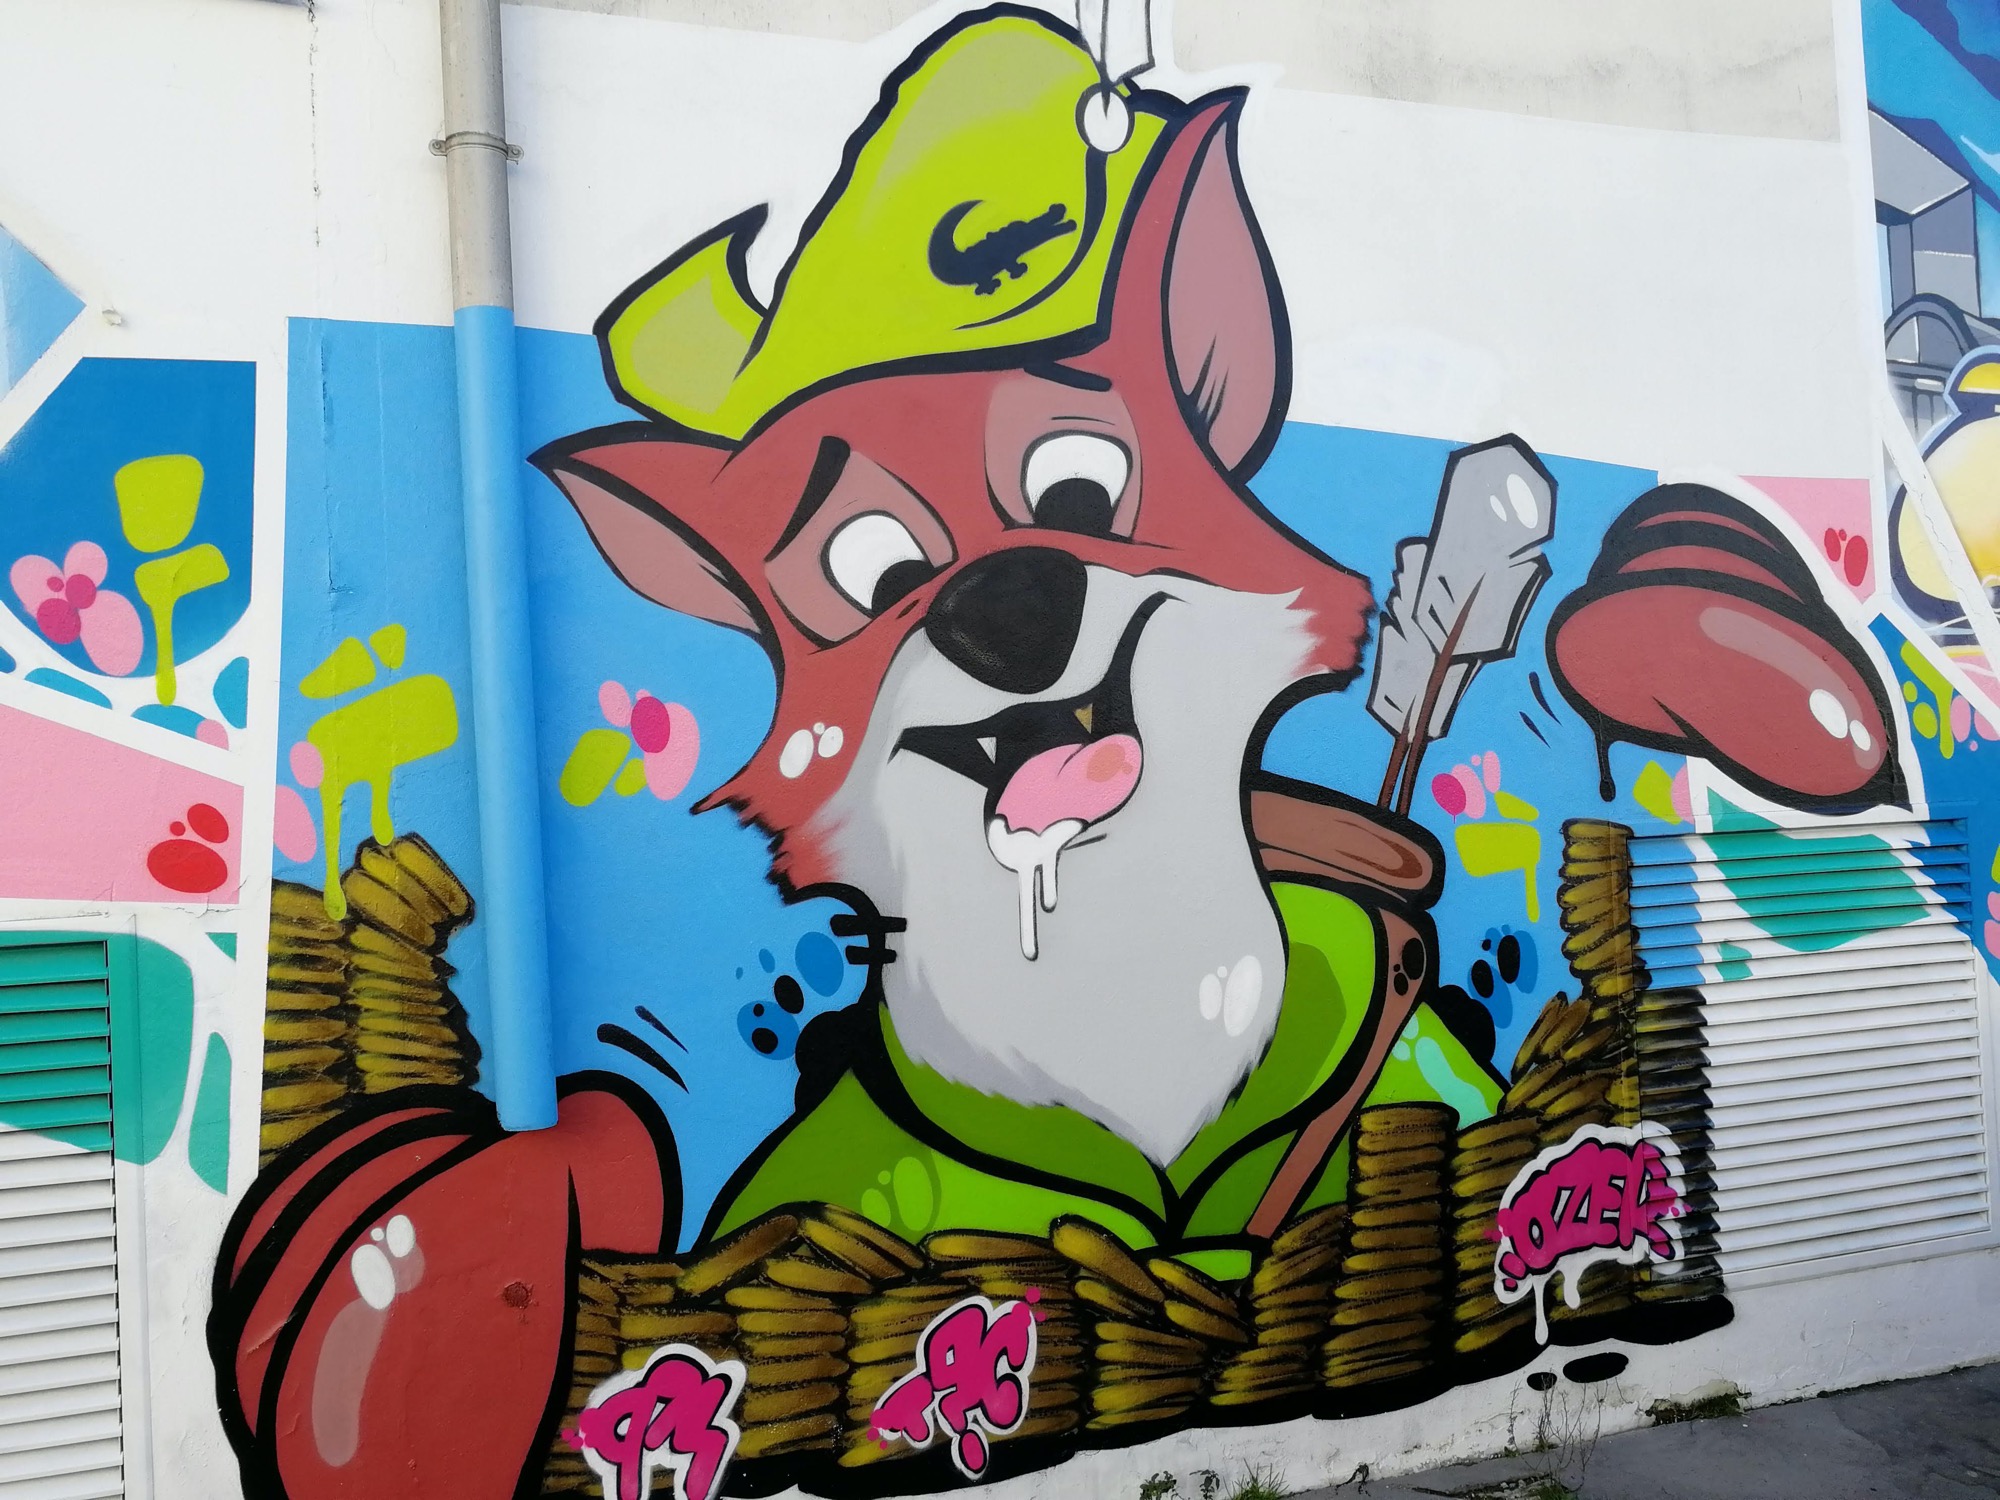 Graffiti 1125 Robin hood by the artist Ozer 974 captured by Rabot in Bordeaux France